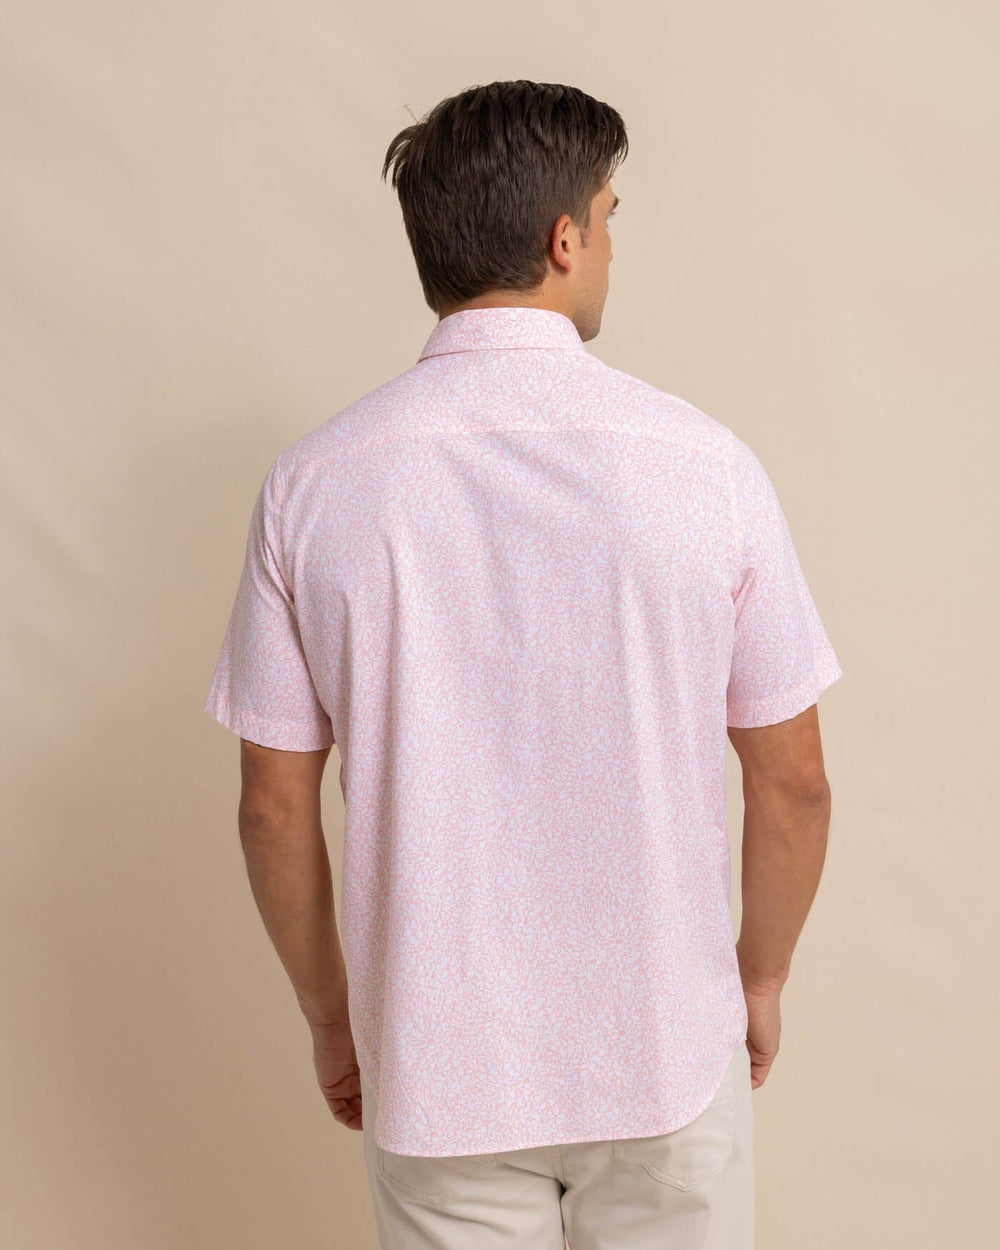 The back view of the Southern Tide brrr Intercoastal That Floral Feeling Short Sleeve Sport Shirt by Southern Tide - Apricot Blush Coral